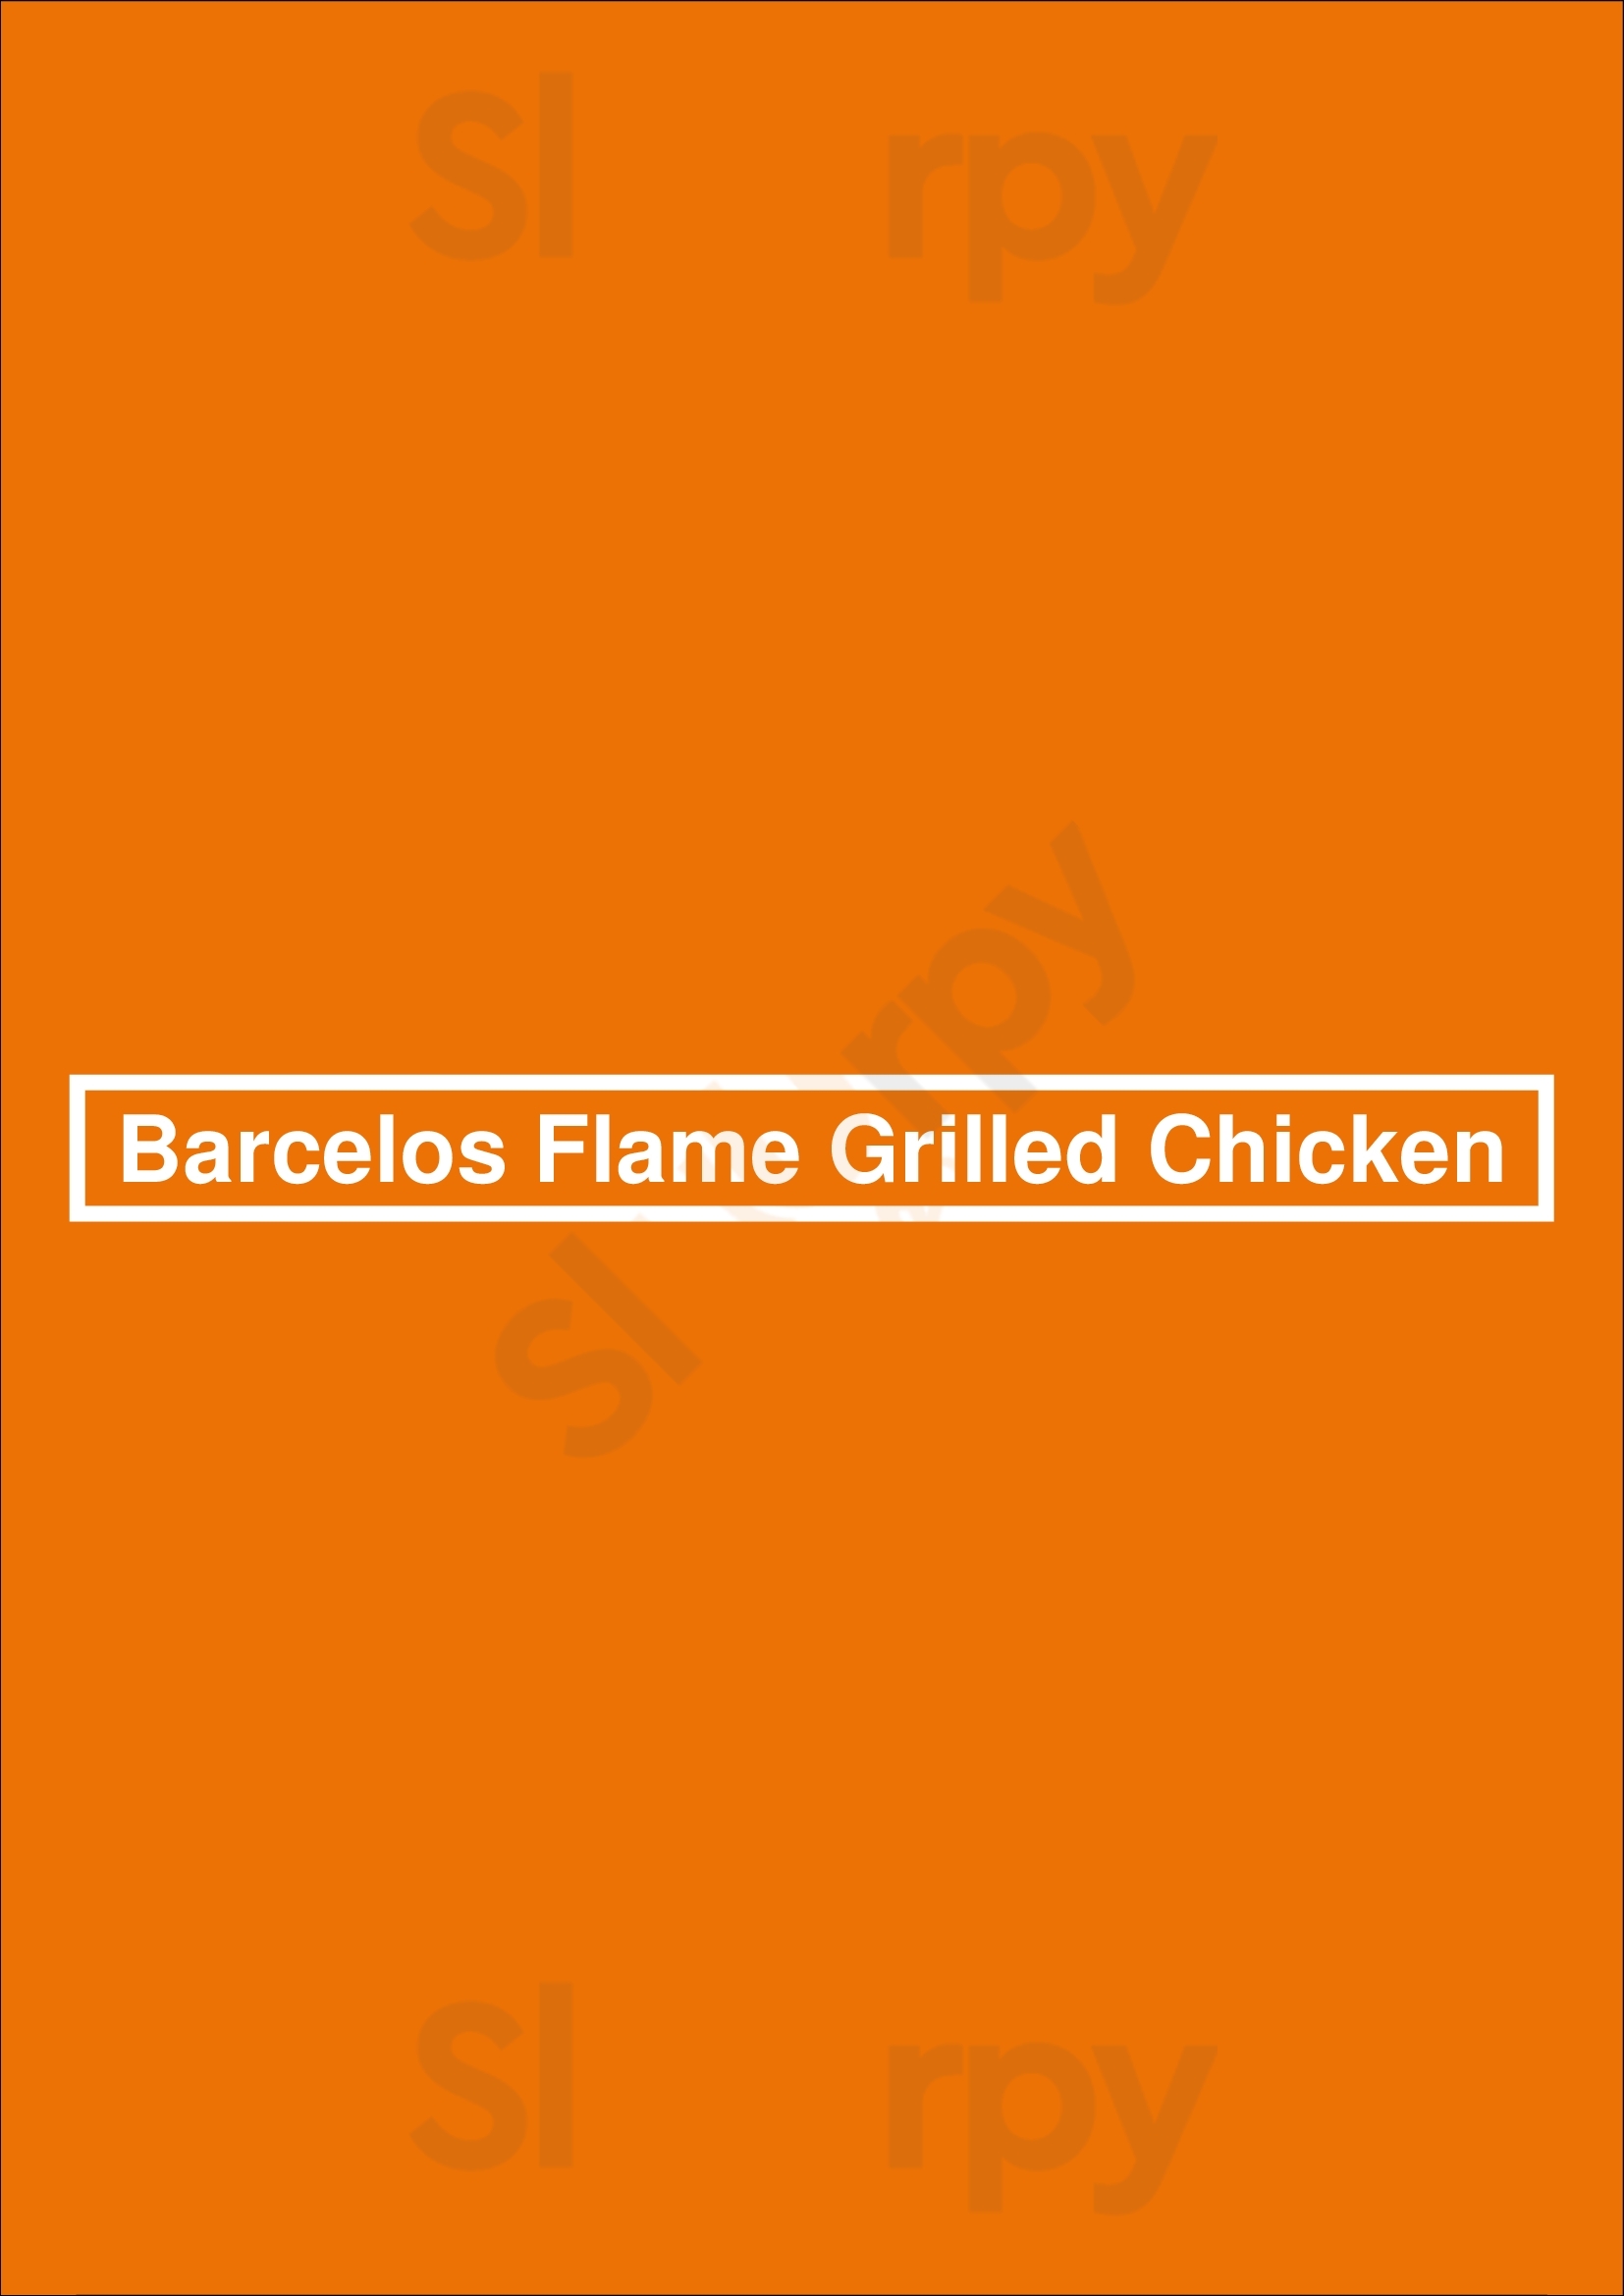 Barcelos Flame Grilled Chicken North Vancouver Menu - 1